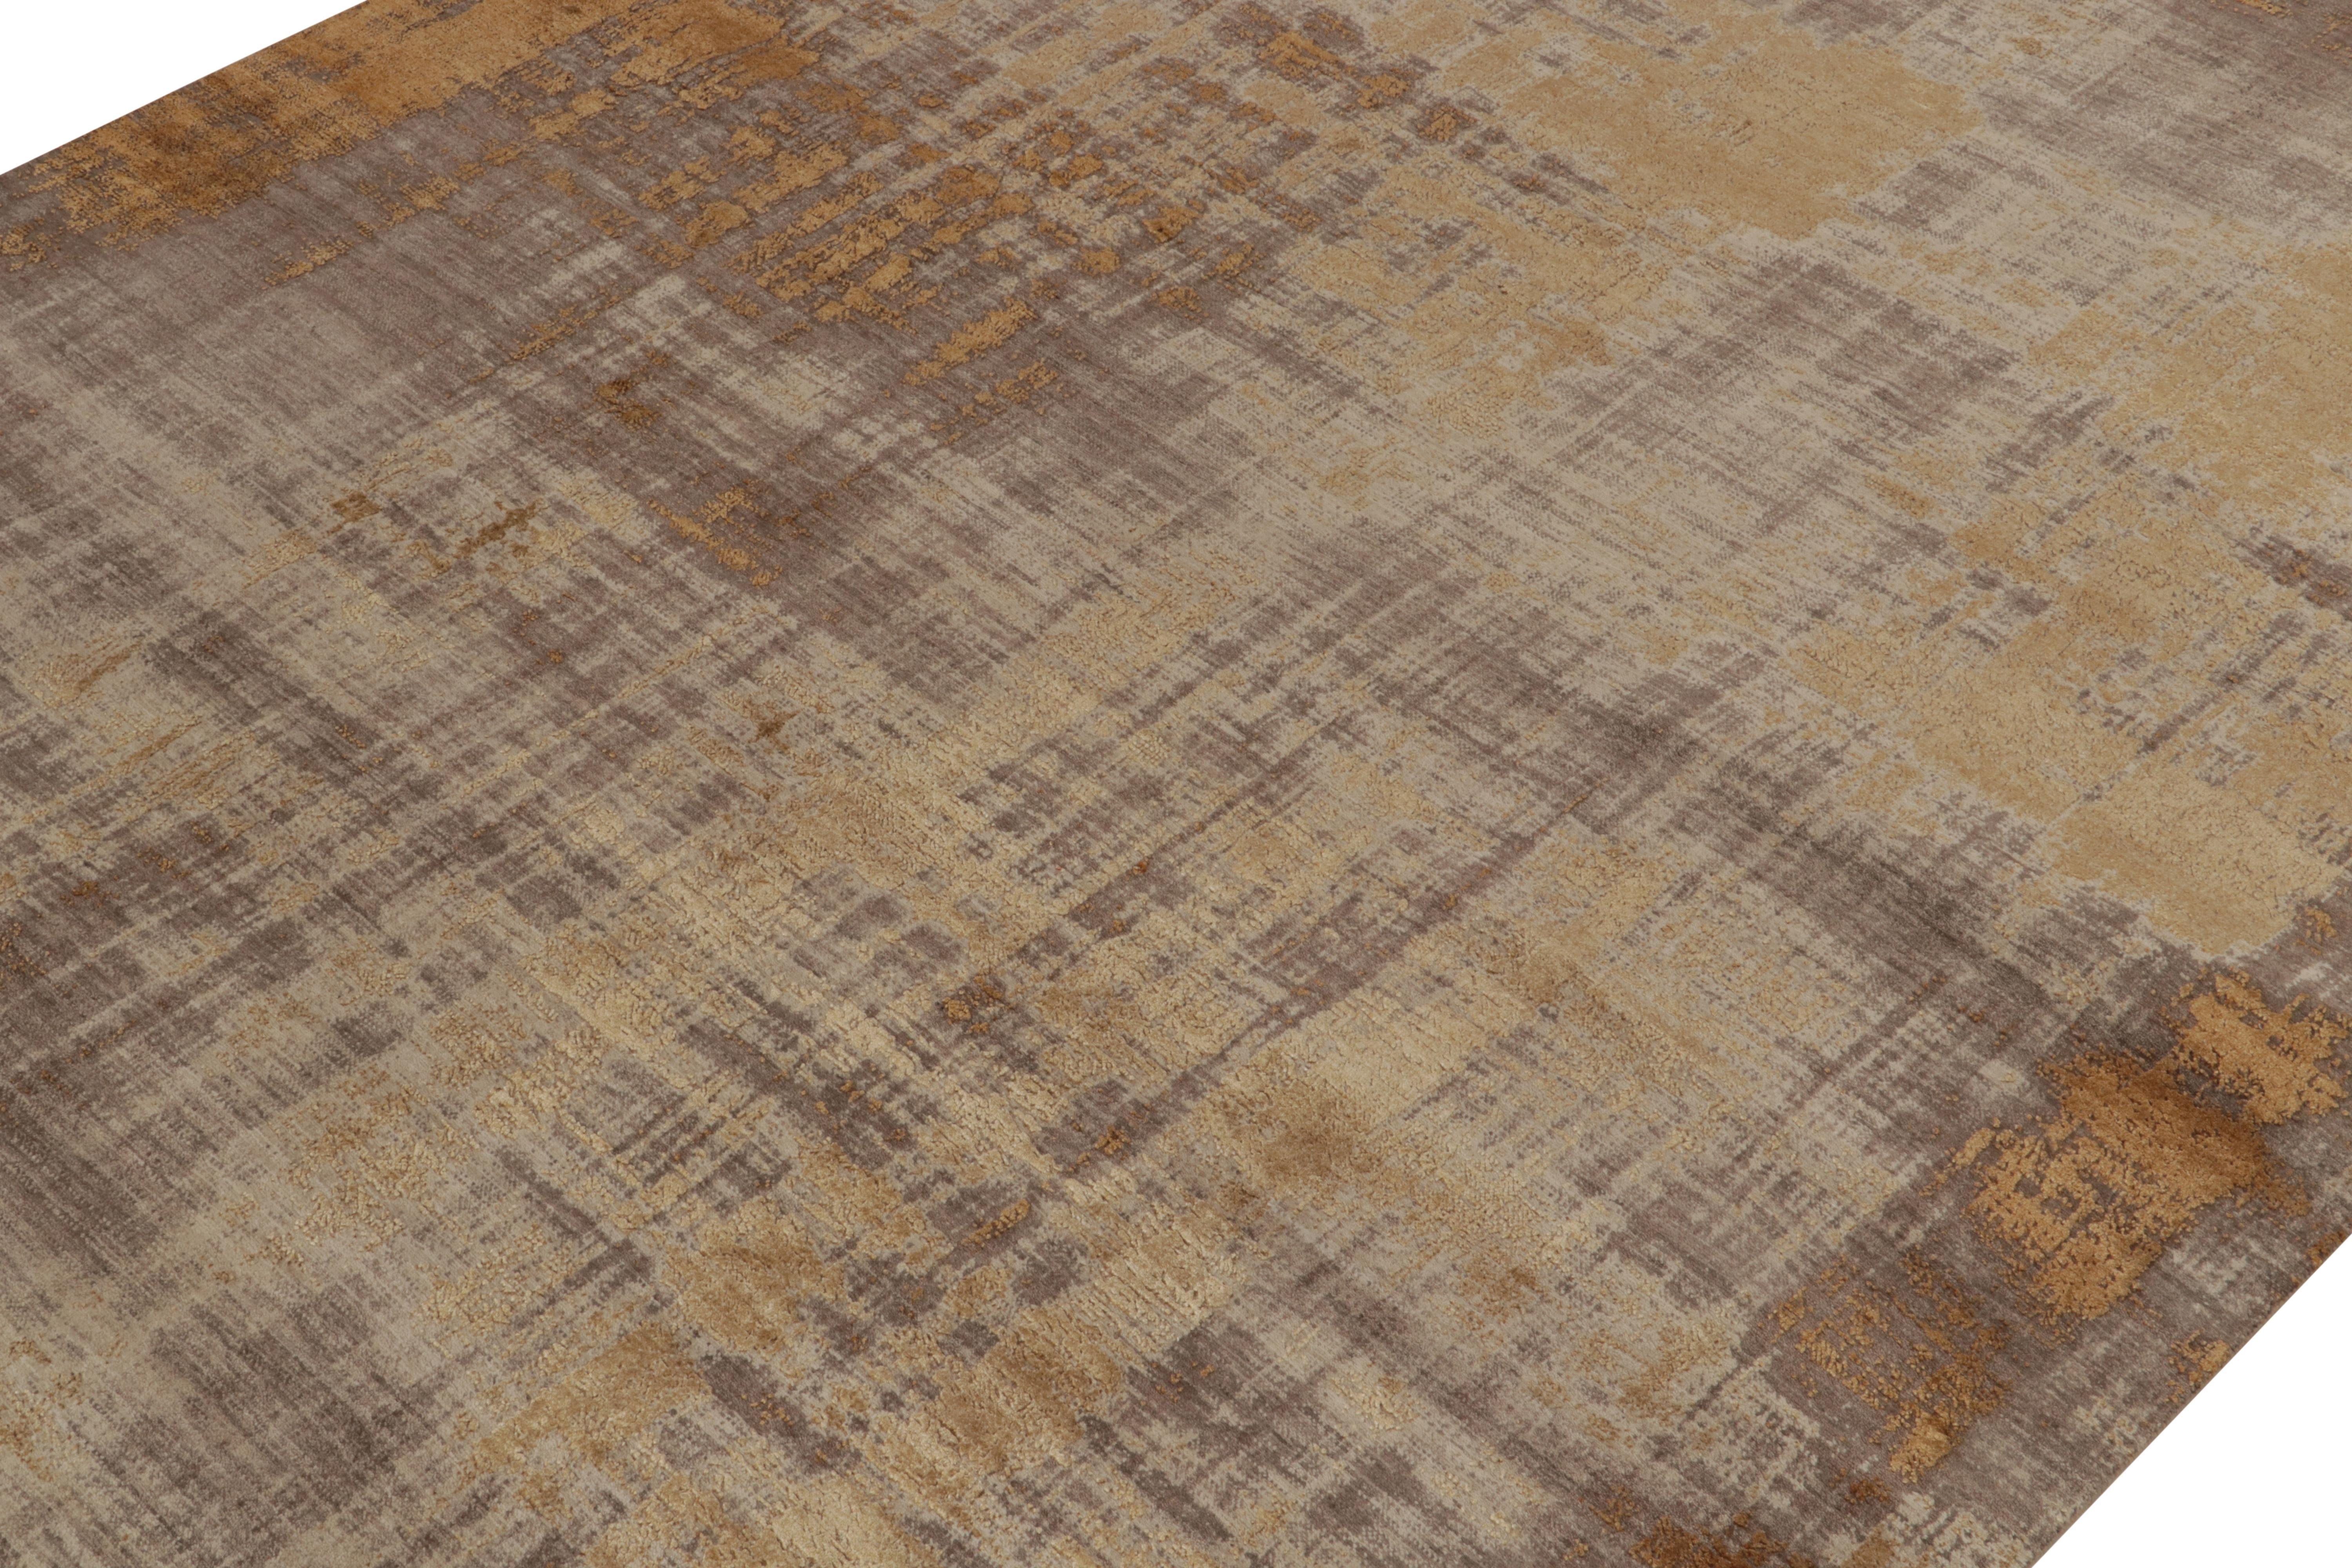 Indian Rug & Kilim’s Abstract Rug in Copper-Brown, Gold and Grey All over Pattern For Sale